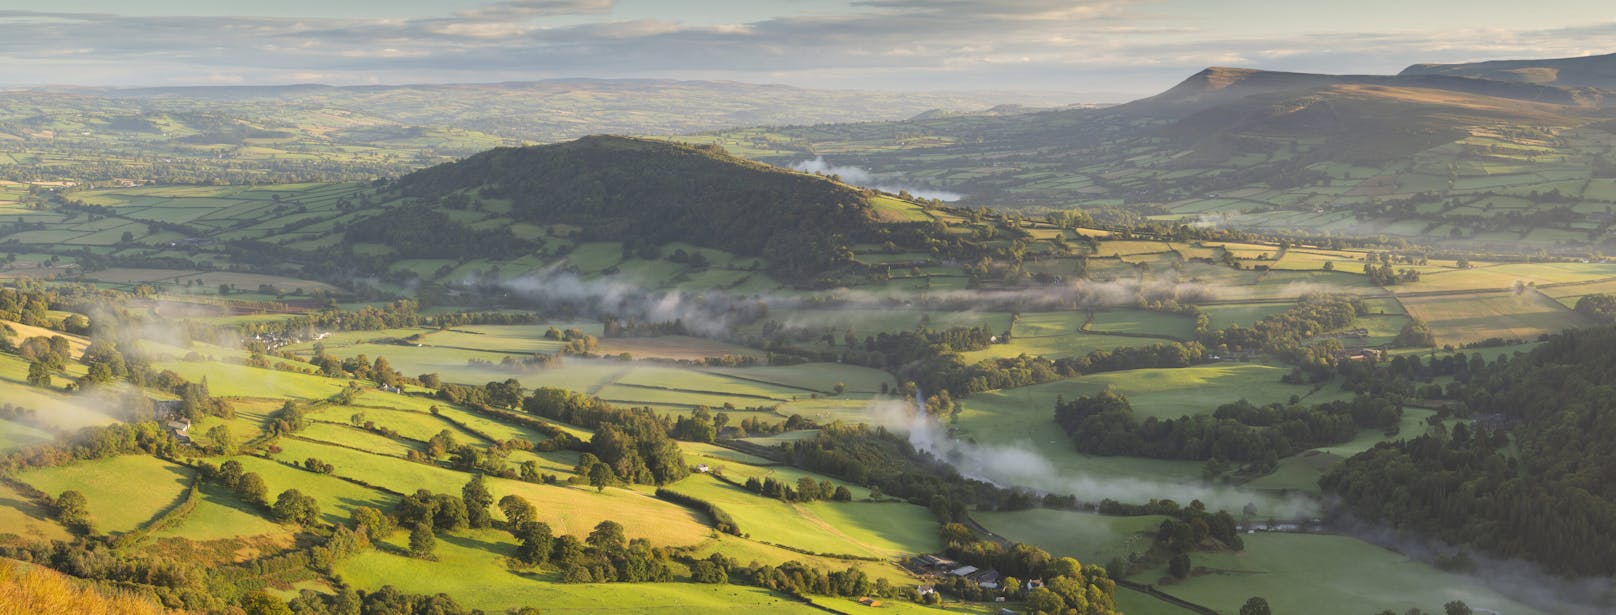 Morgenstimmung im Brecon Beacons Nationalpark in Powys, Wales